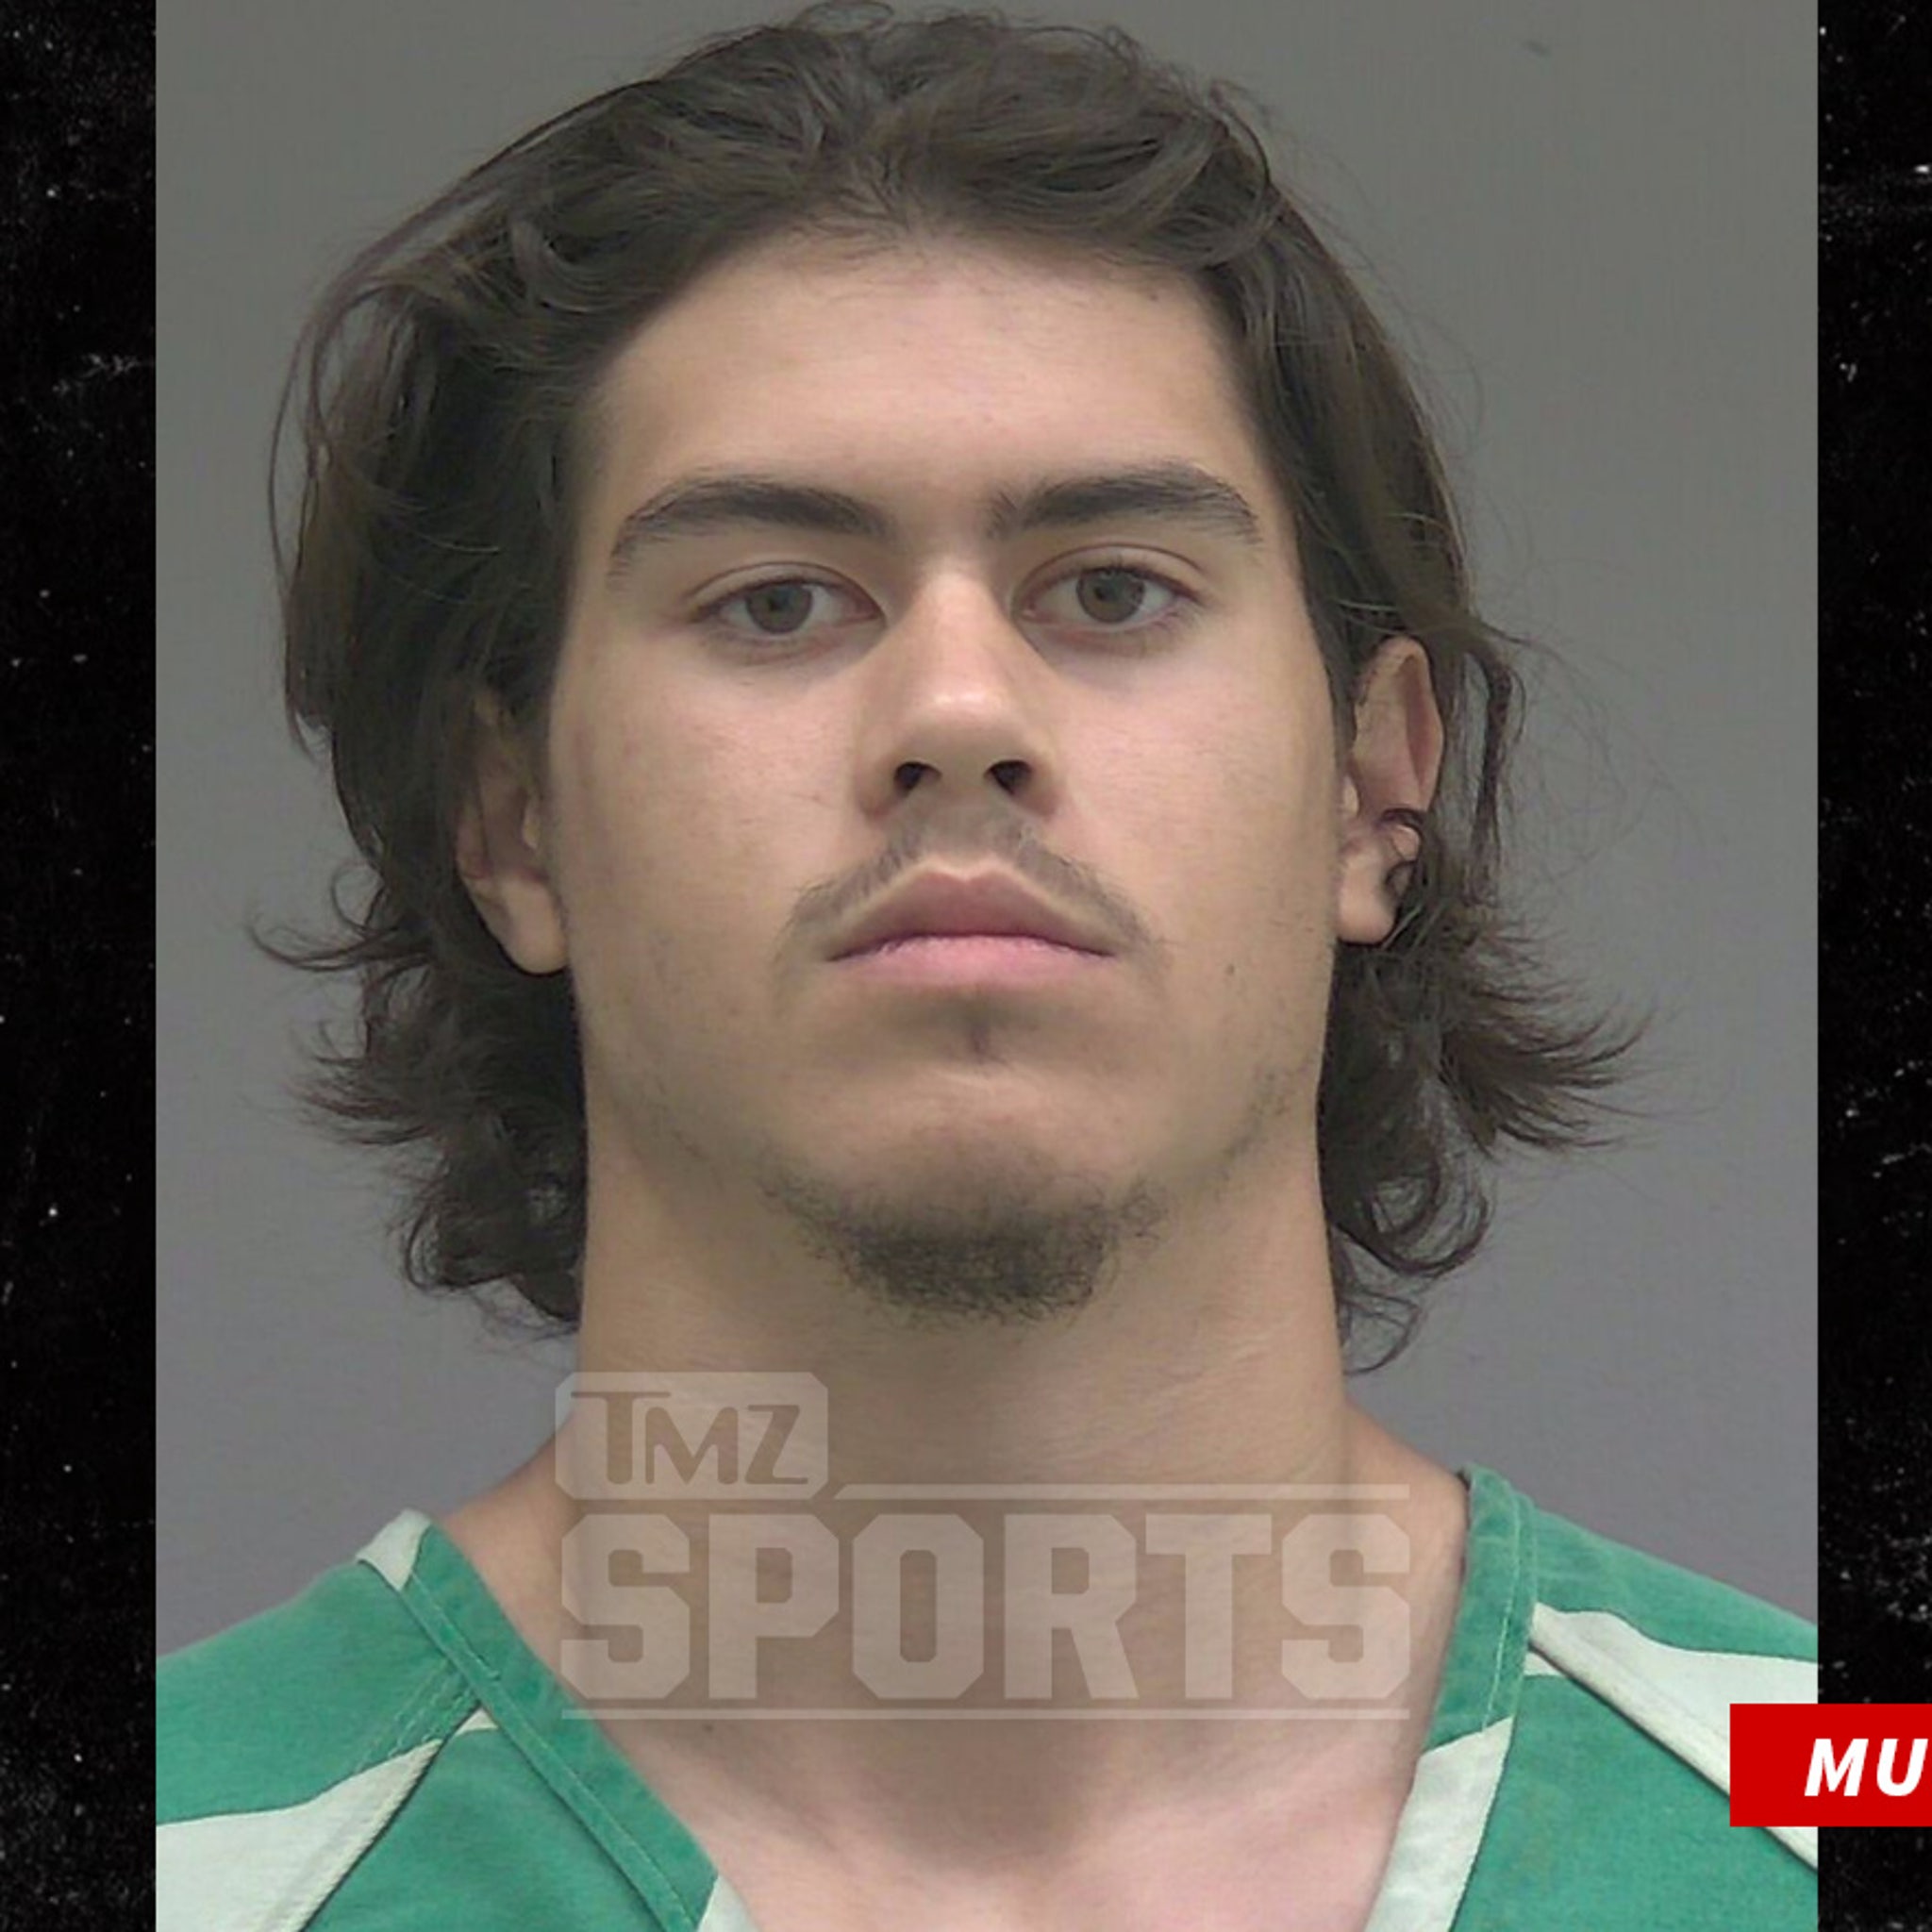 UF QB Jalen Kitna Shared Image Of Adult Male Having Sex With Child, Cops photo